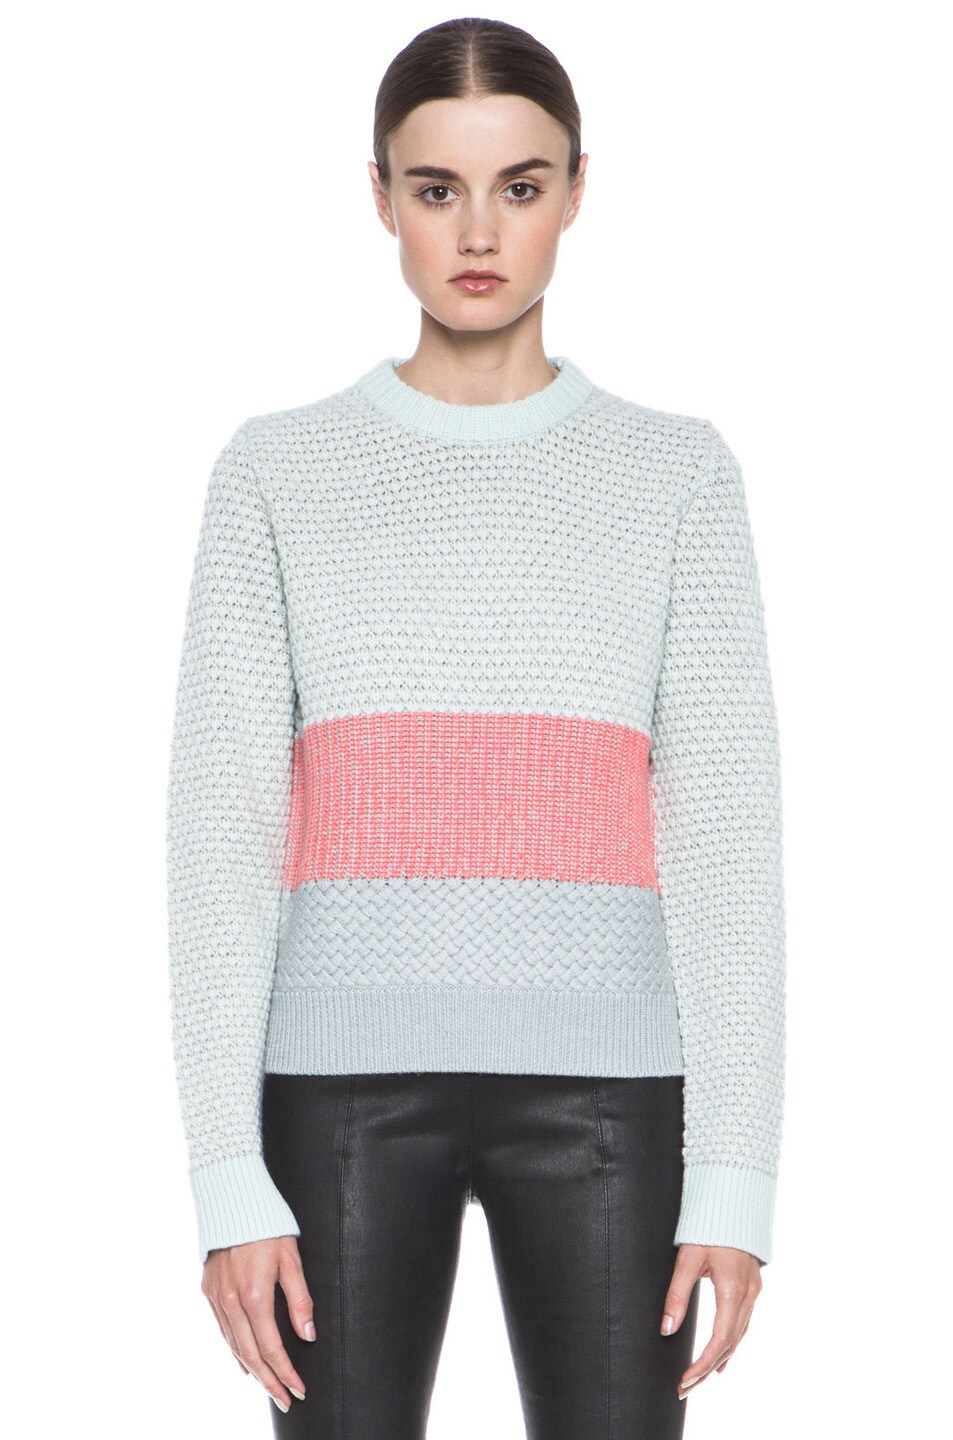 Proenza Schouler Collage Wool-Blend Crewneck Sweater in Baby Blue Combo ...